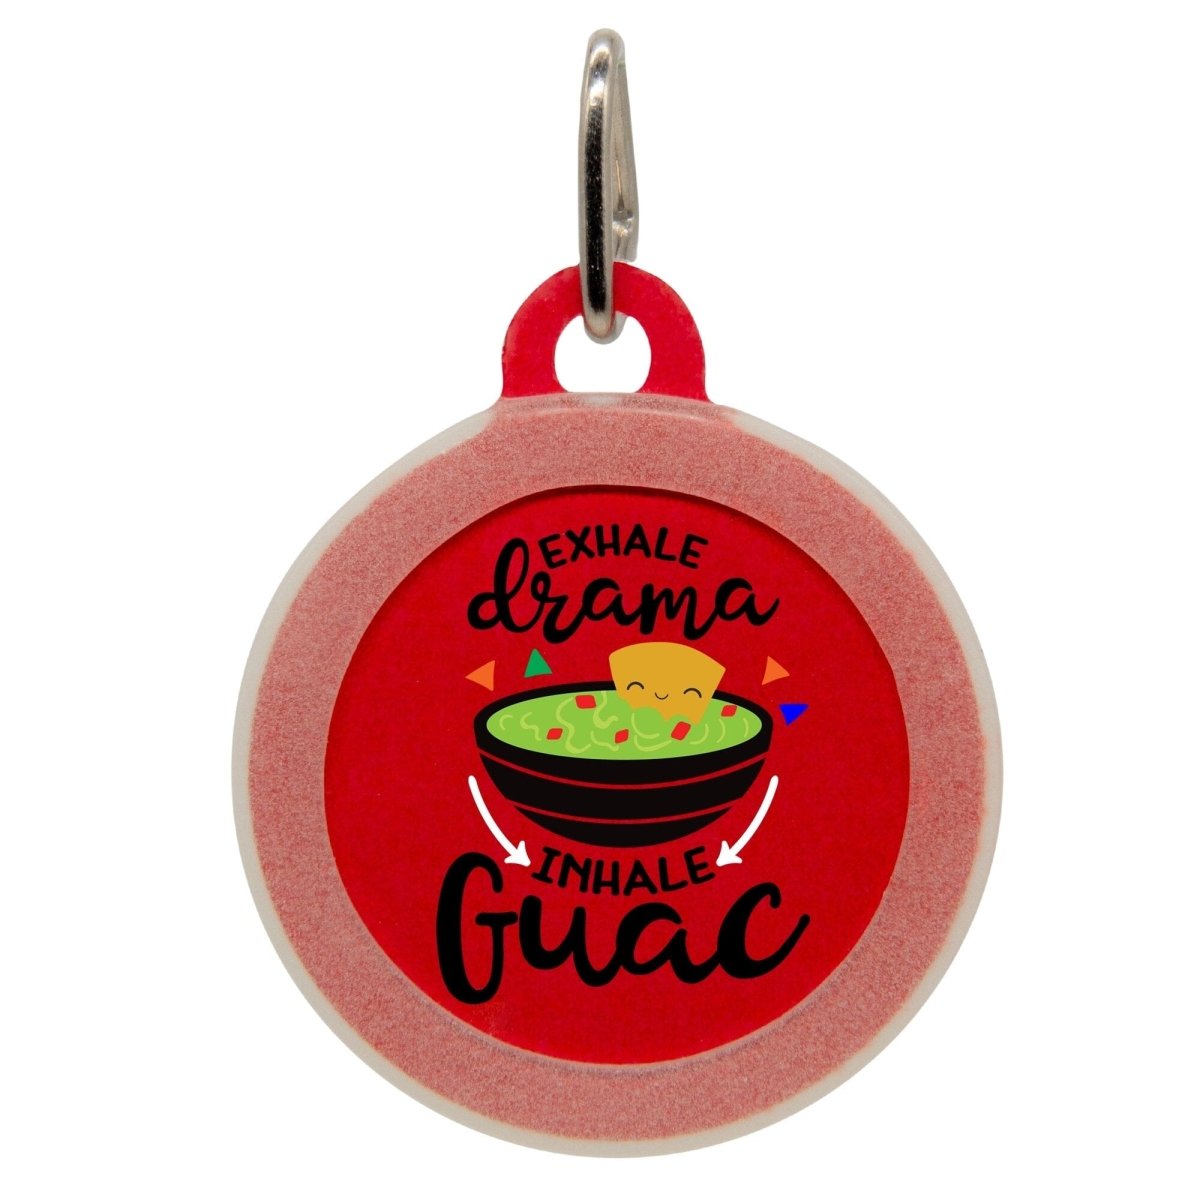 Exhale Drama Inhale Guac Name Tag - Oh My Paw&#39;d